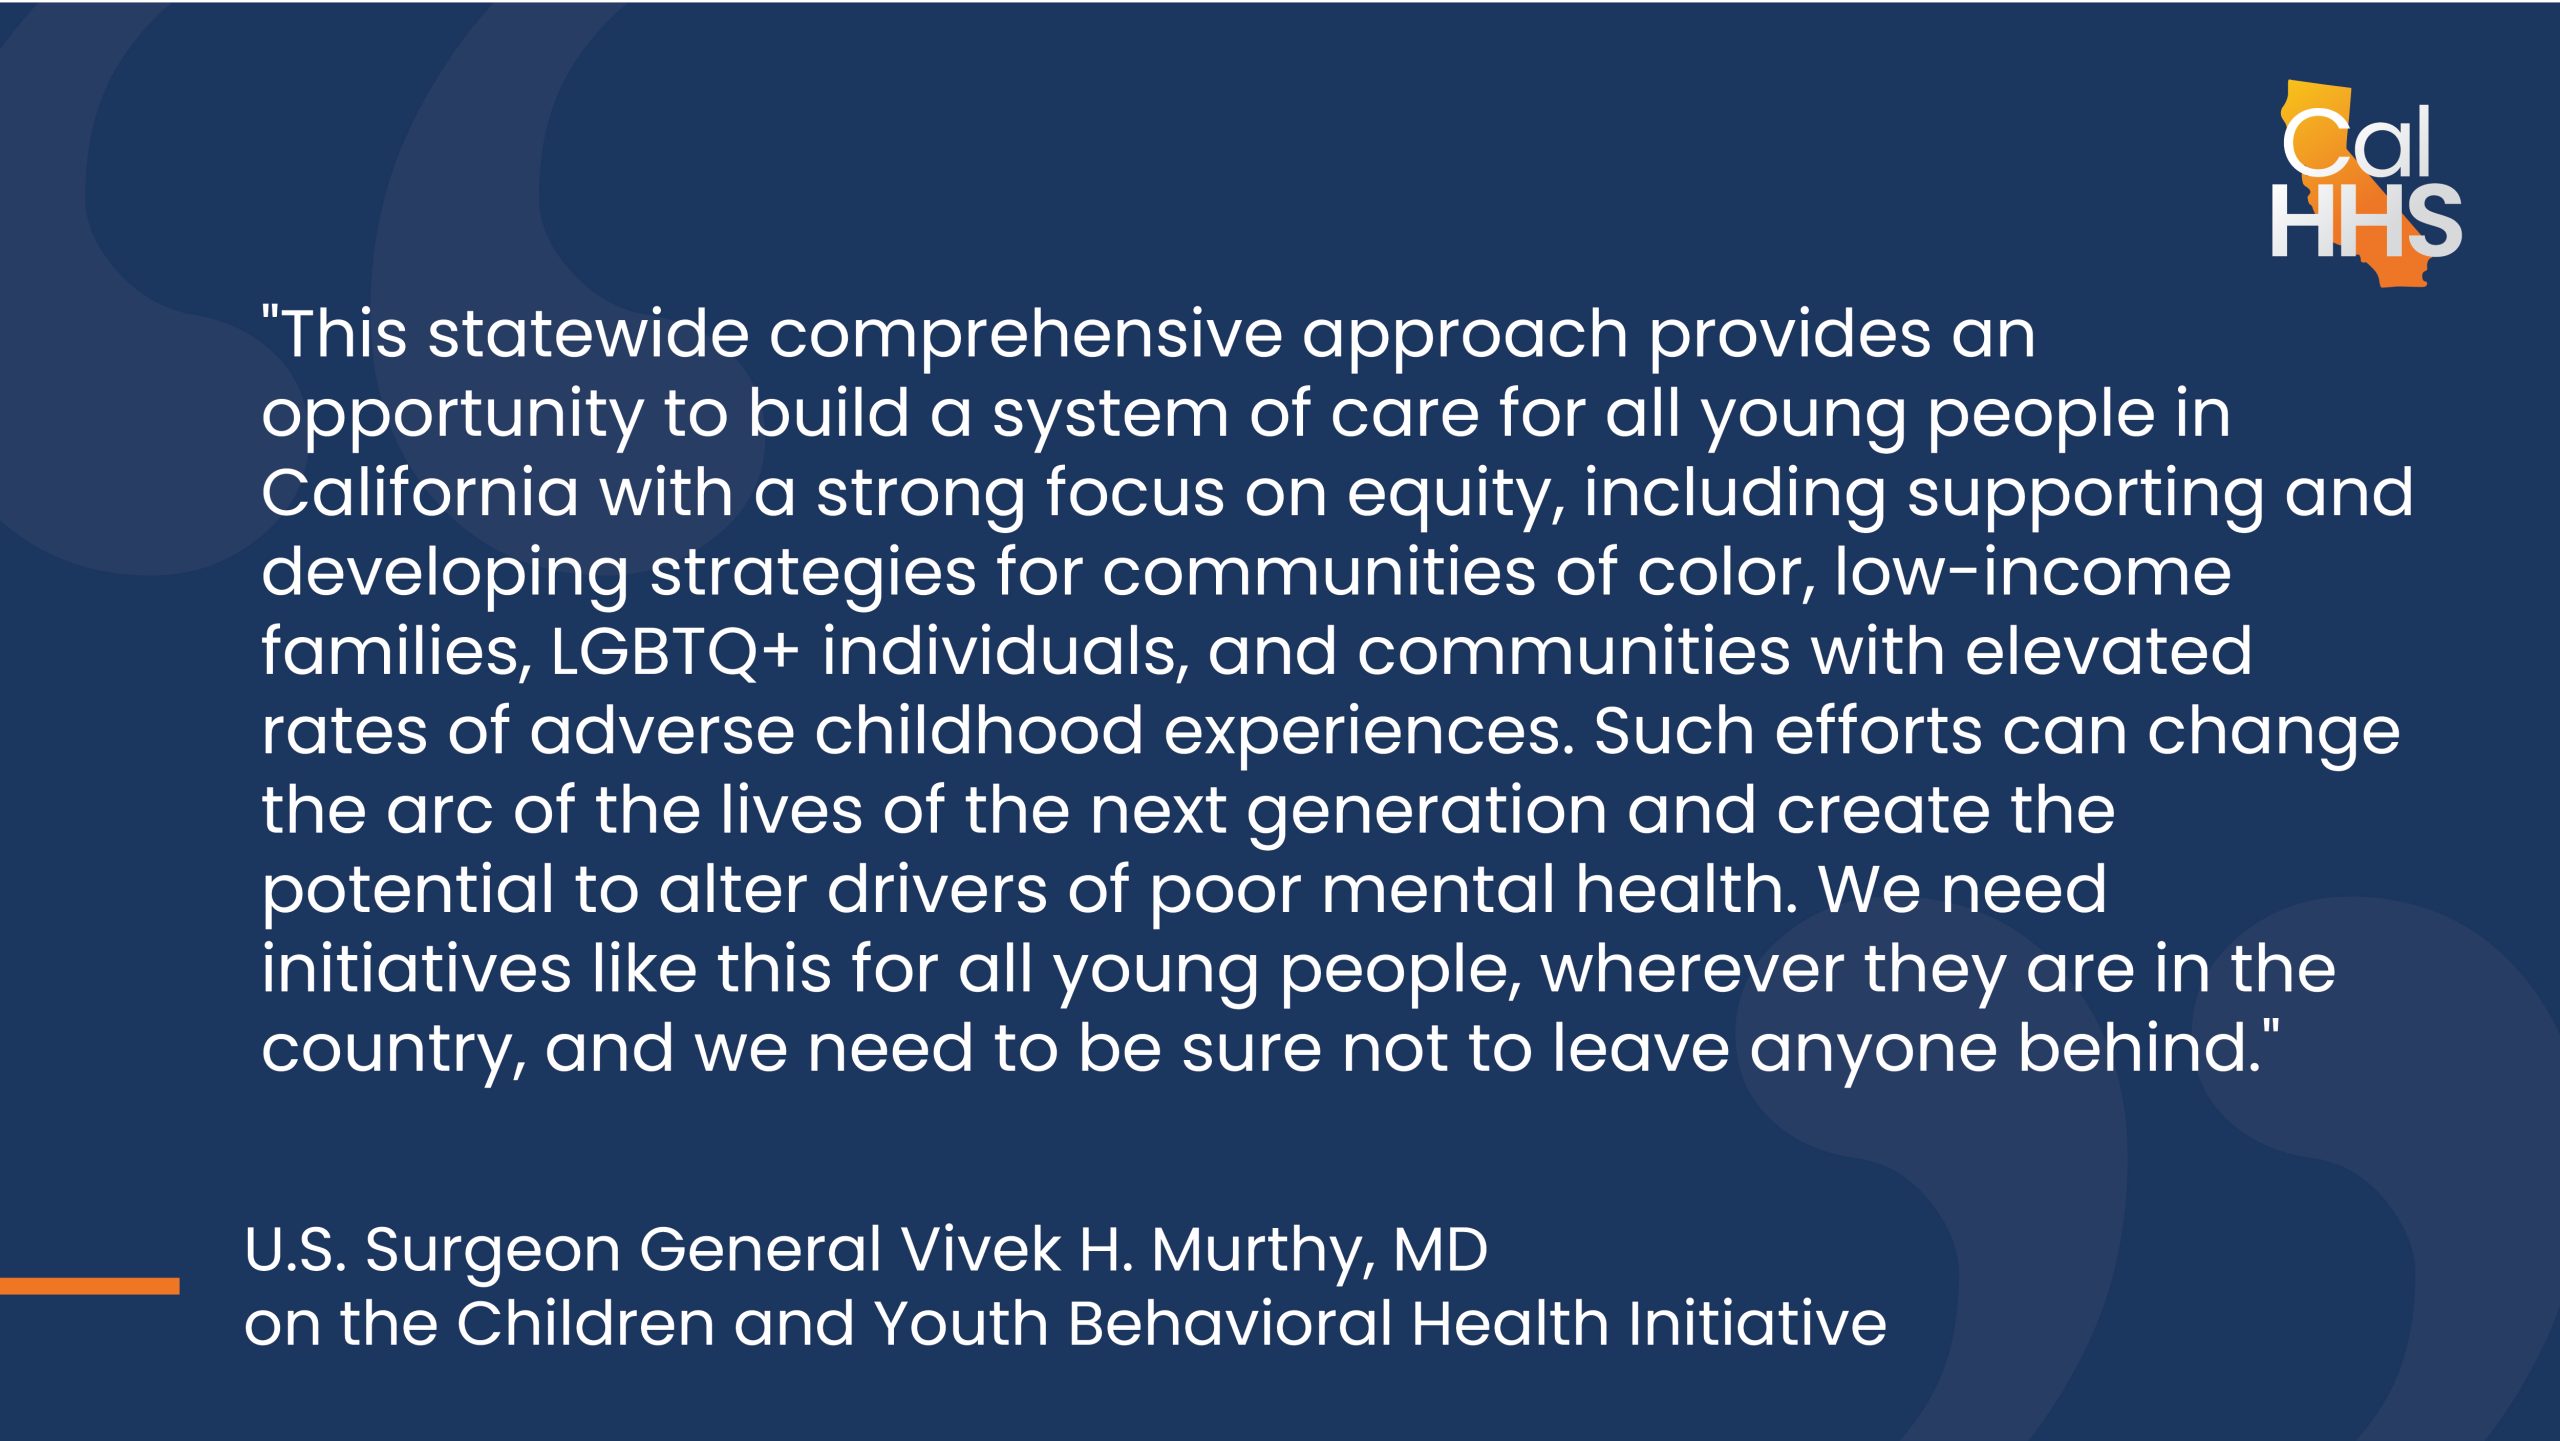 "This statewide comprehensive approach provides an opportunity to build a system of care for all young people in California with a strong focus on equity, including supporting and developing strategies for communities of color, low-income families, LGBTQ+ individuals, and communities with elevated rates of adverse childhood experiences. Such efforts can change the arc of the lives of the next generation and create the potential to alter drivers of poor mental health. We need initiatives like this for all young people, wherever they are in the country, and we need to be sure not to leave anyone behind."   – U.S. Surgeon General Vivek H. Murthy, MD on the Children and Youth Behavioral Health Initiative.